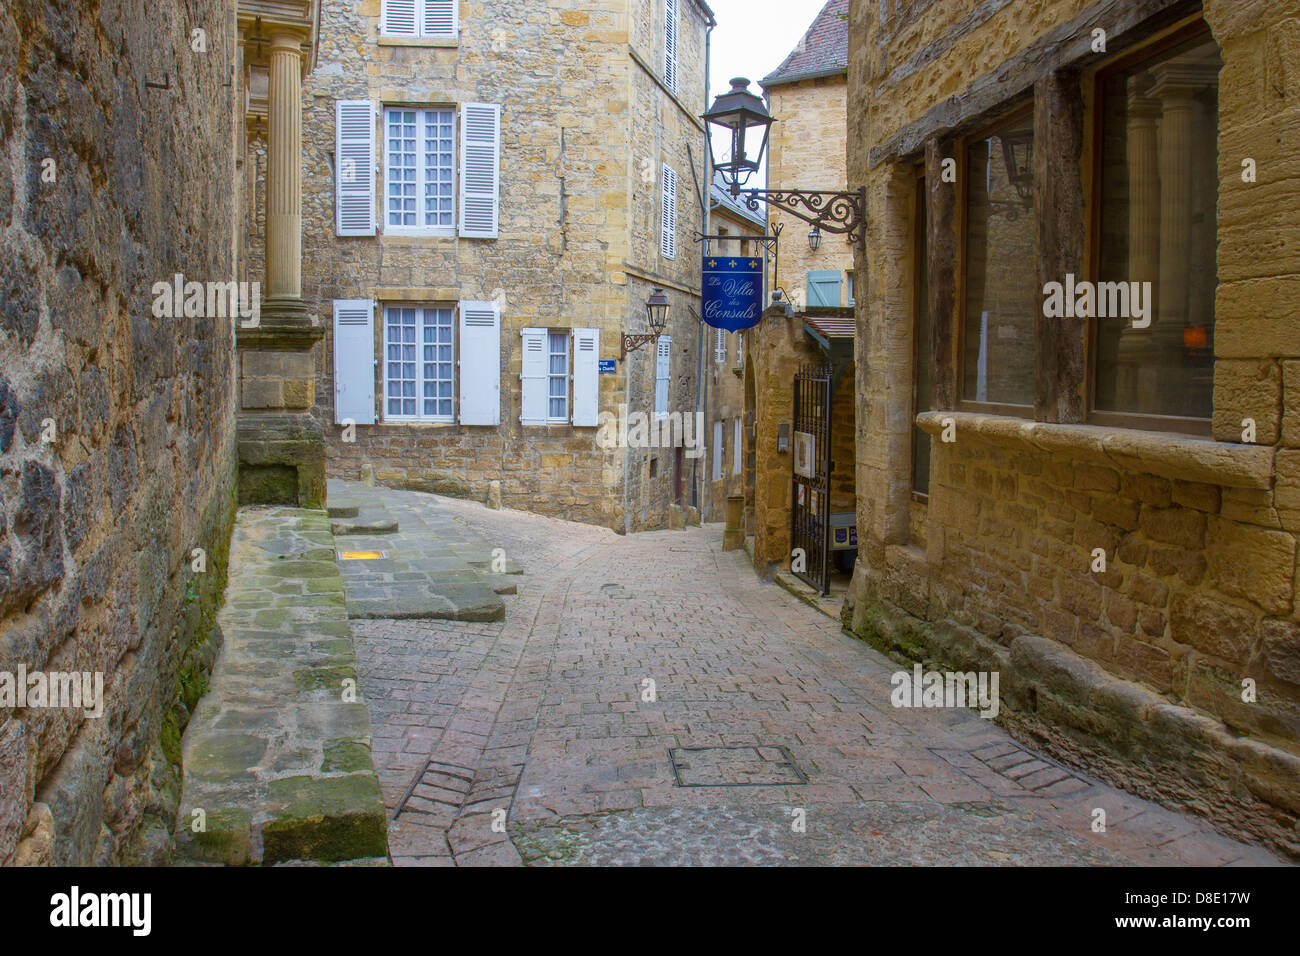 Narrow cobblestone street among medieval sandstone buildings lined with hotels in charming Sarlat, Dordogne region of France Stock Photo